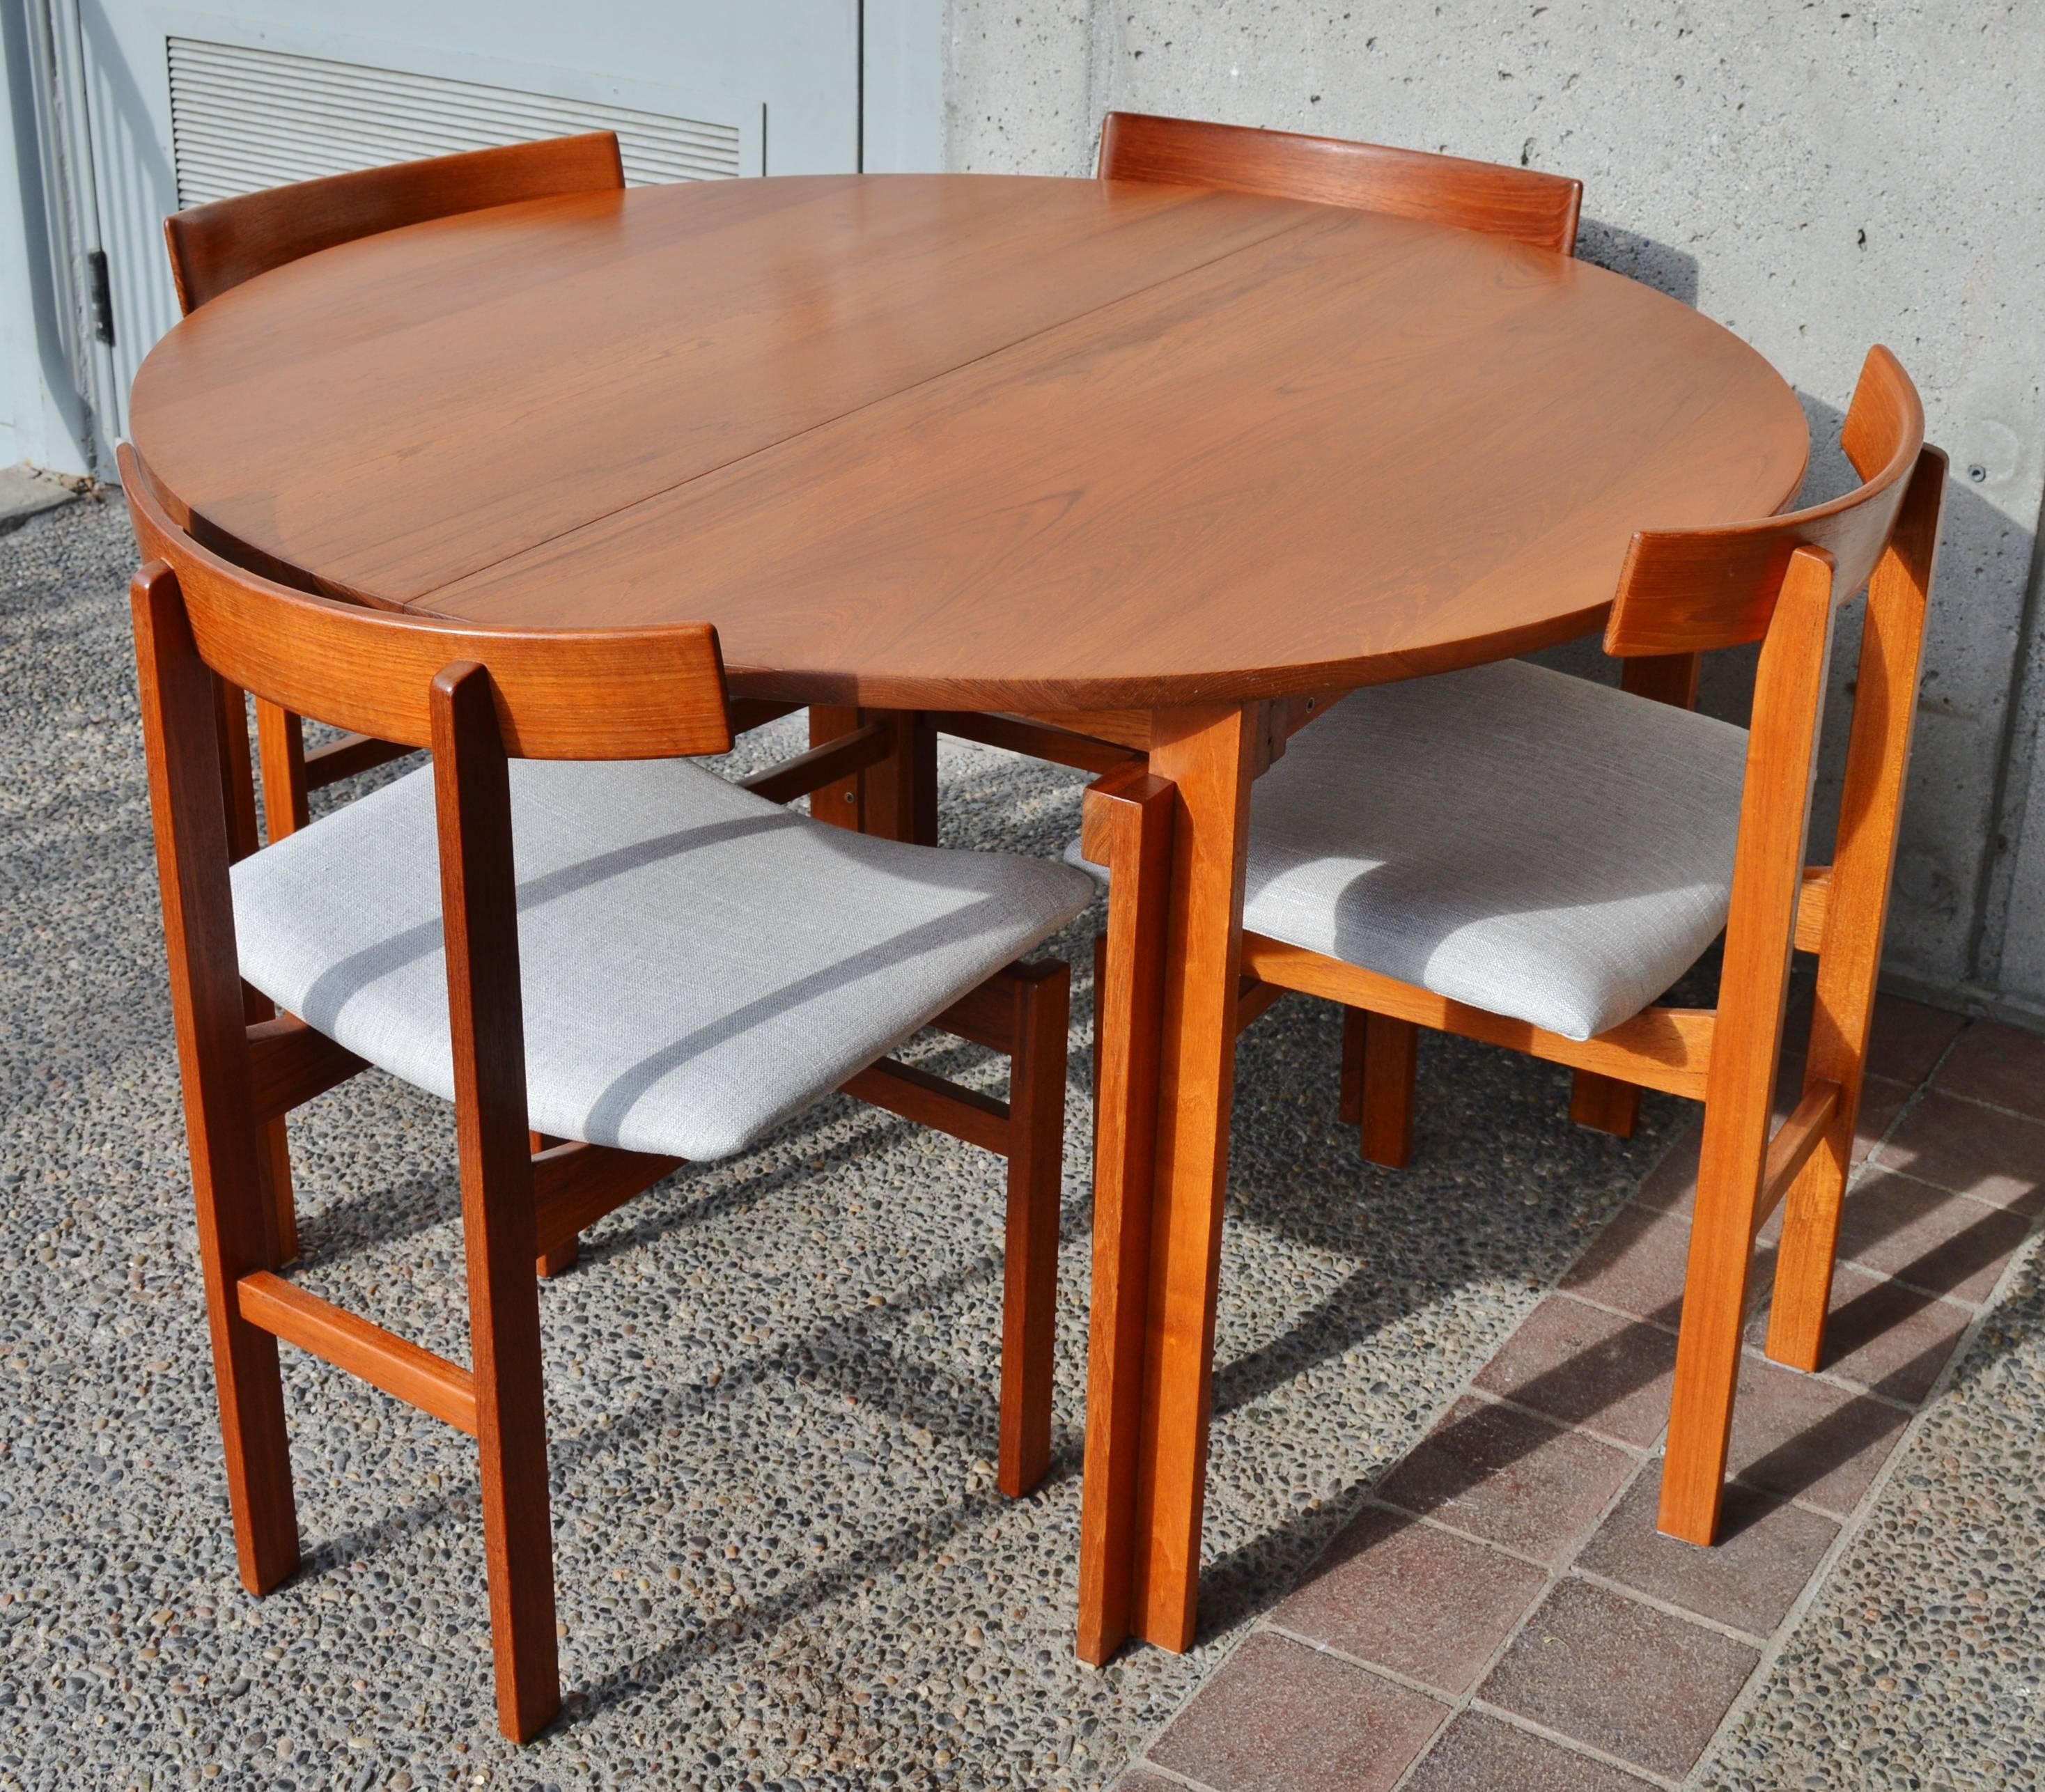 This incredibly rare Danish modern teak dining set was designed by Inger Klingenberg for France & Sons in the 1950s and is clearly marked with the France & Sons medallion on the chairs as well as the dining table and yet we could only find one other